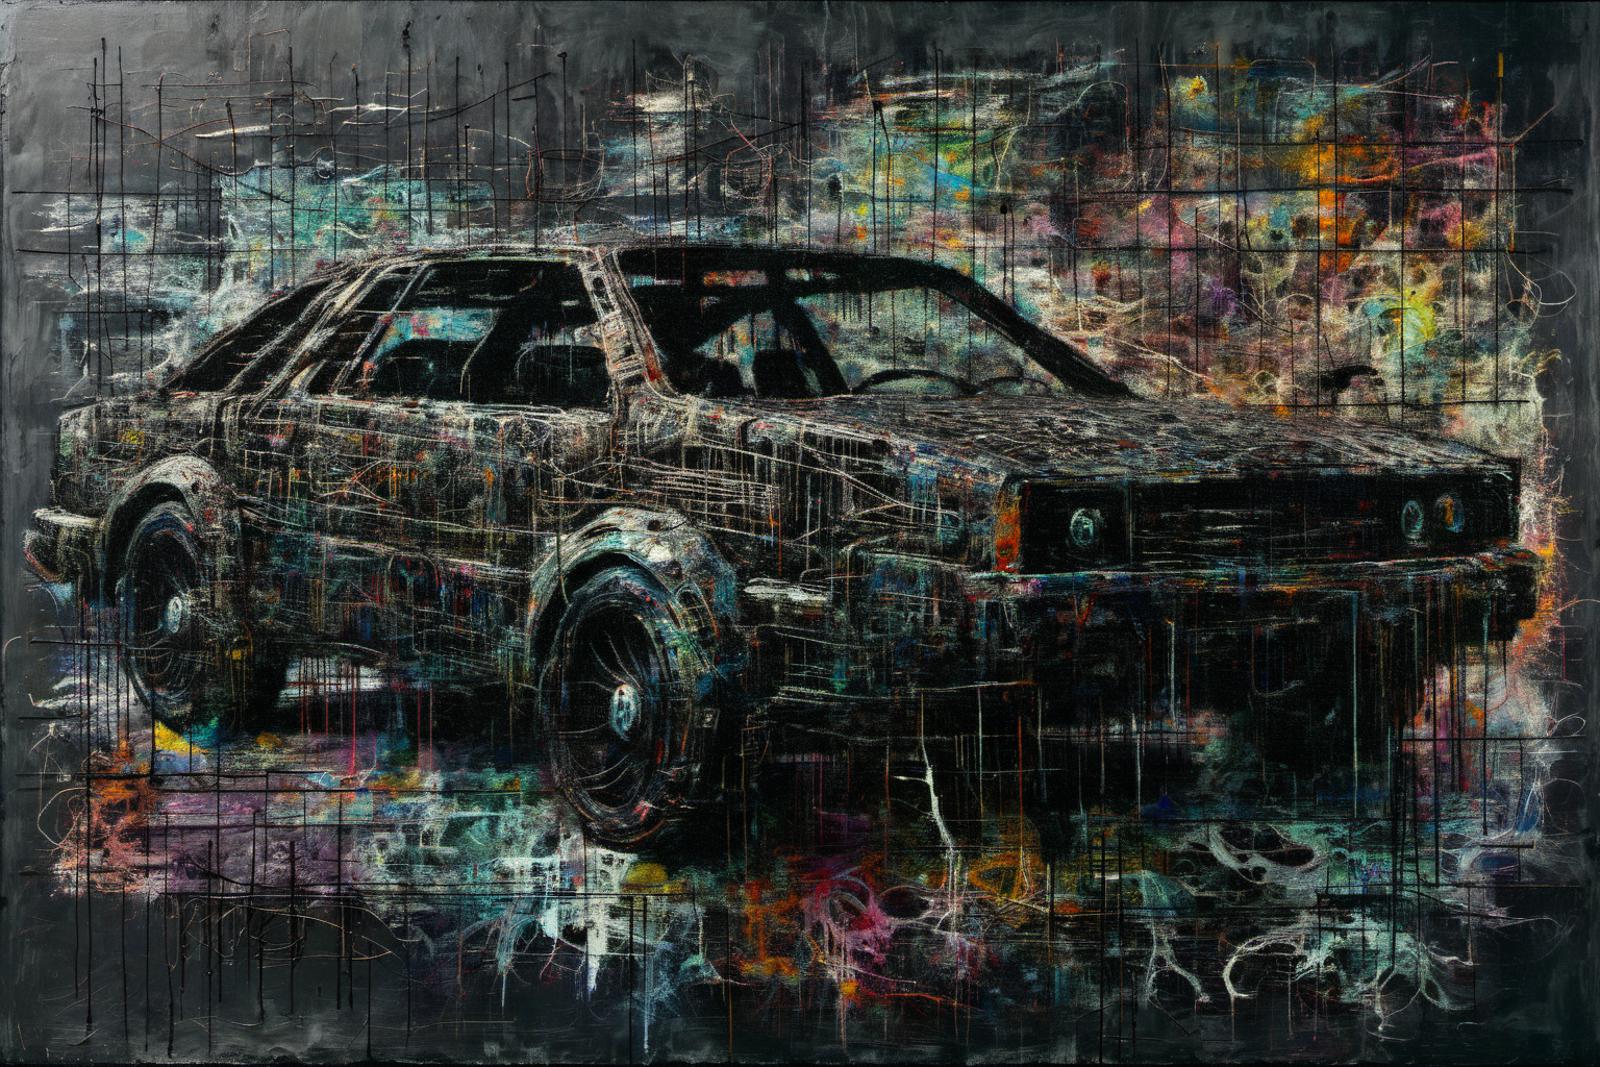 Artistic Painting of a Car in a Garage with Abstract Designs and Colors